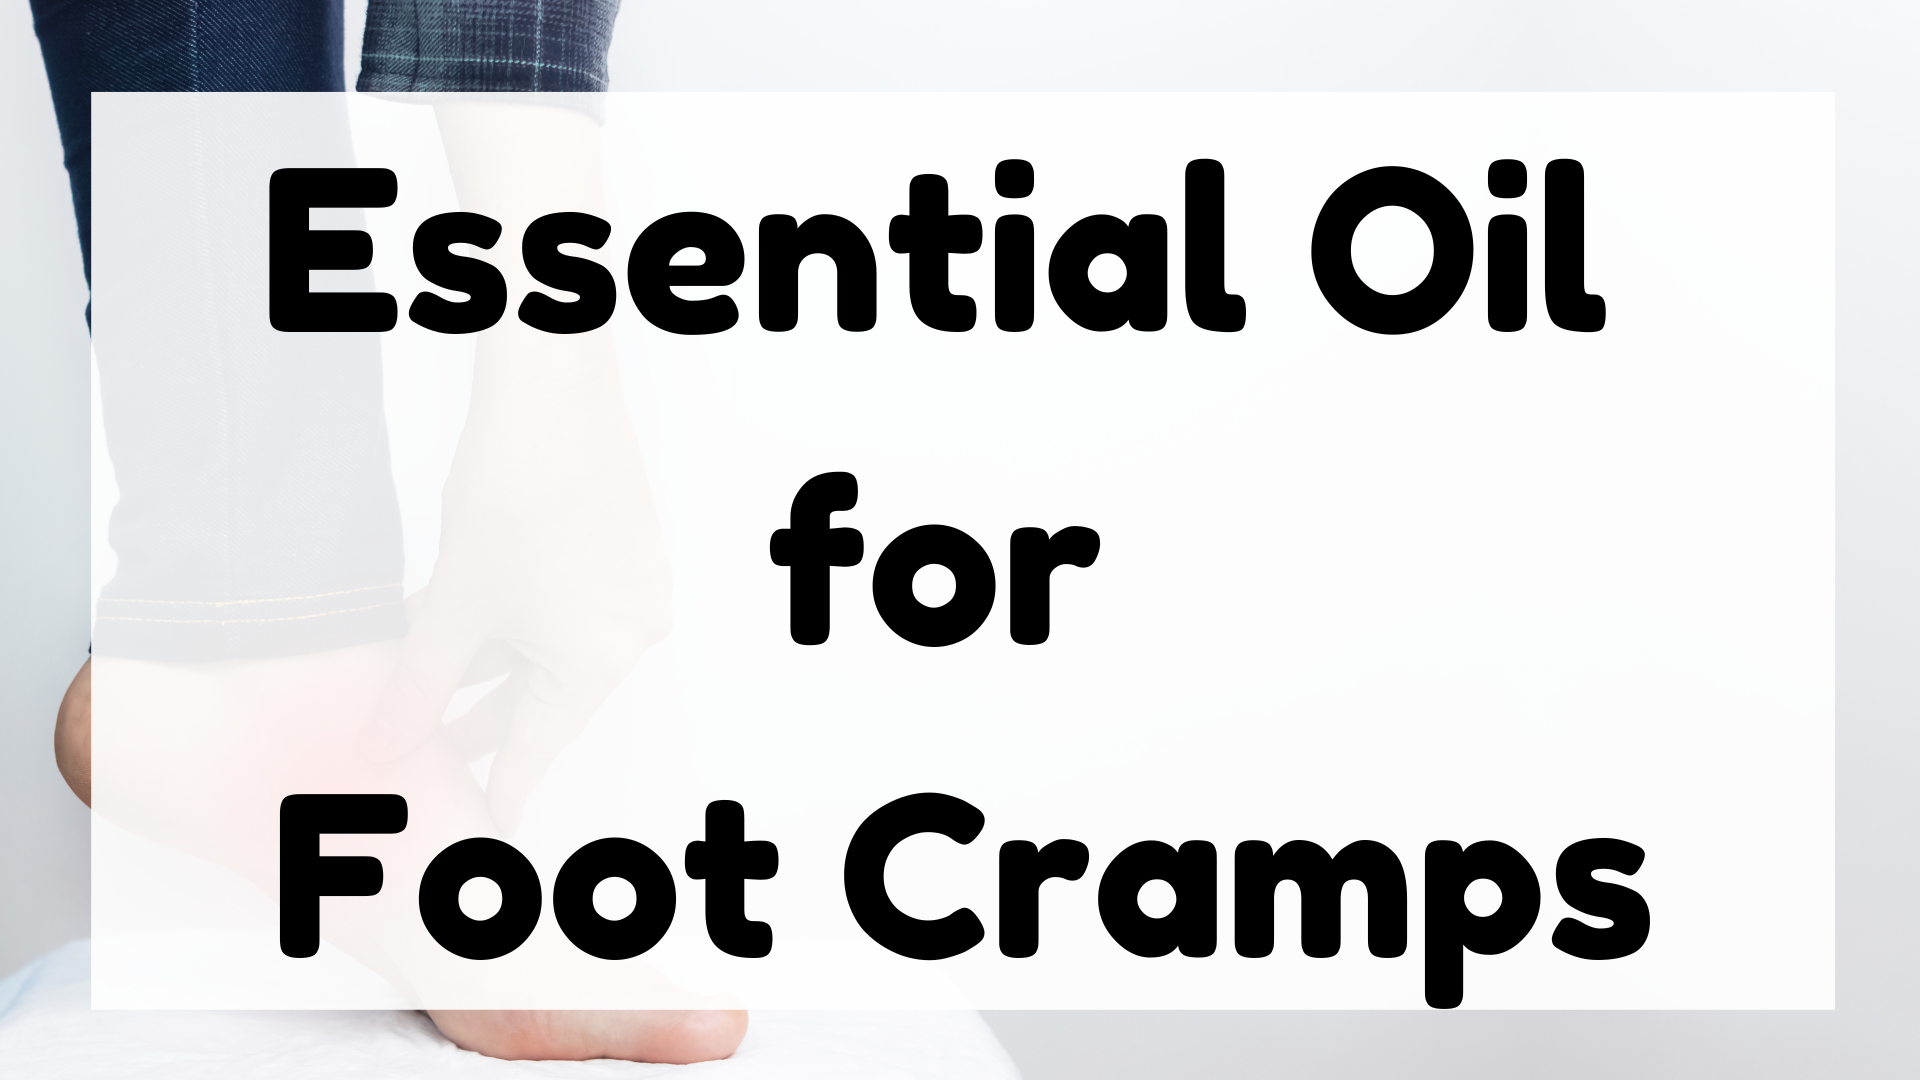 Essential Oil for Foot Cramps featured image